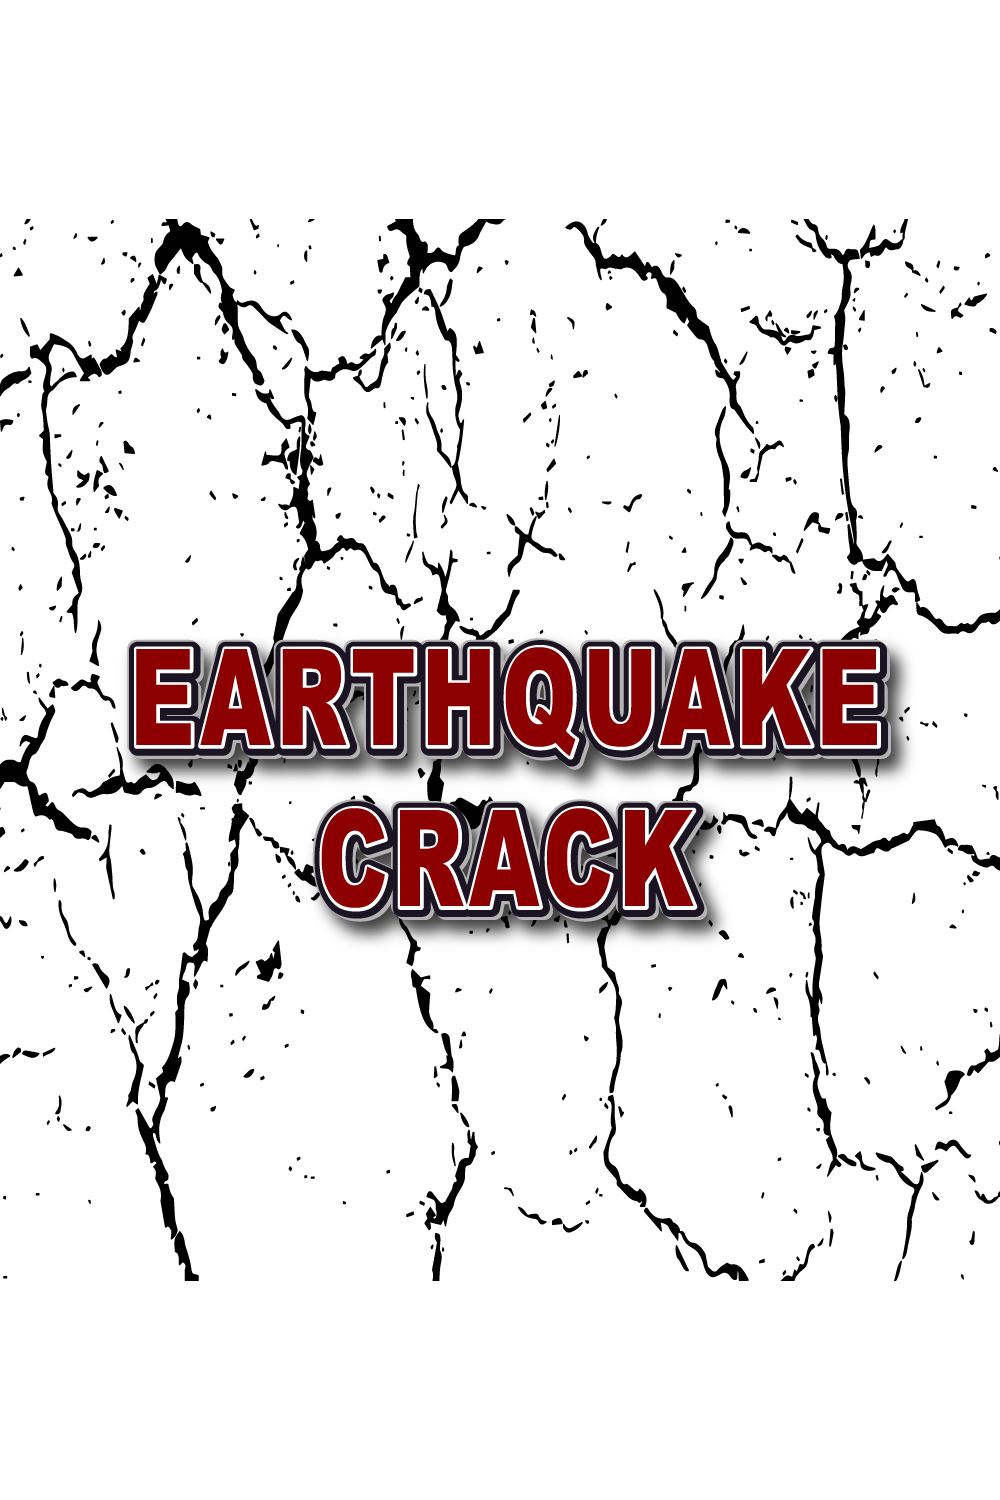 EARTHQUAKE CRACK 3d text effect, earthquake editable text effect, crack effect text, 3d text effect, earthquake banner, , editable text effect, modern ,3D Text Effect Design, pinterest preview image.